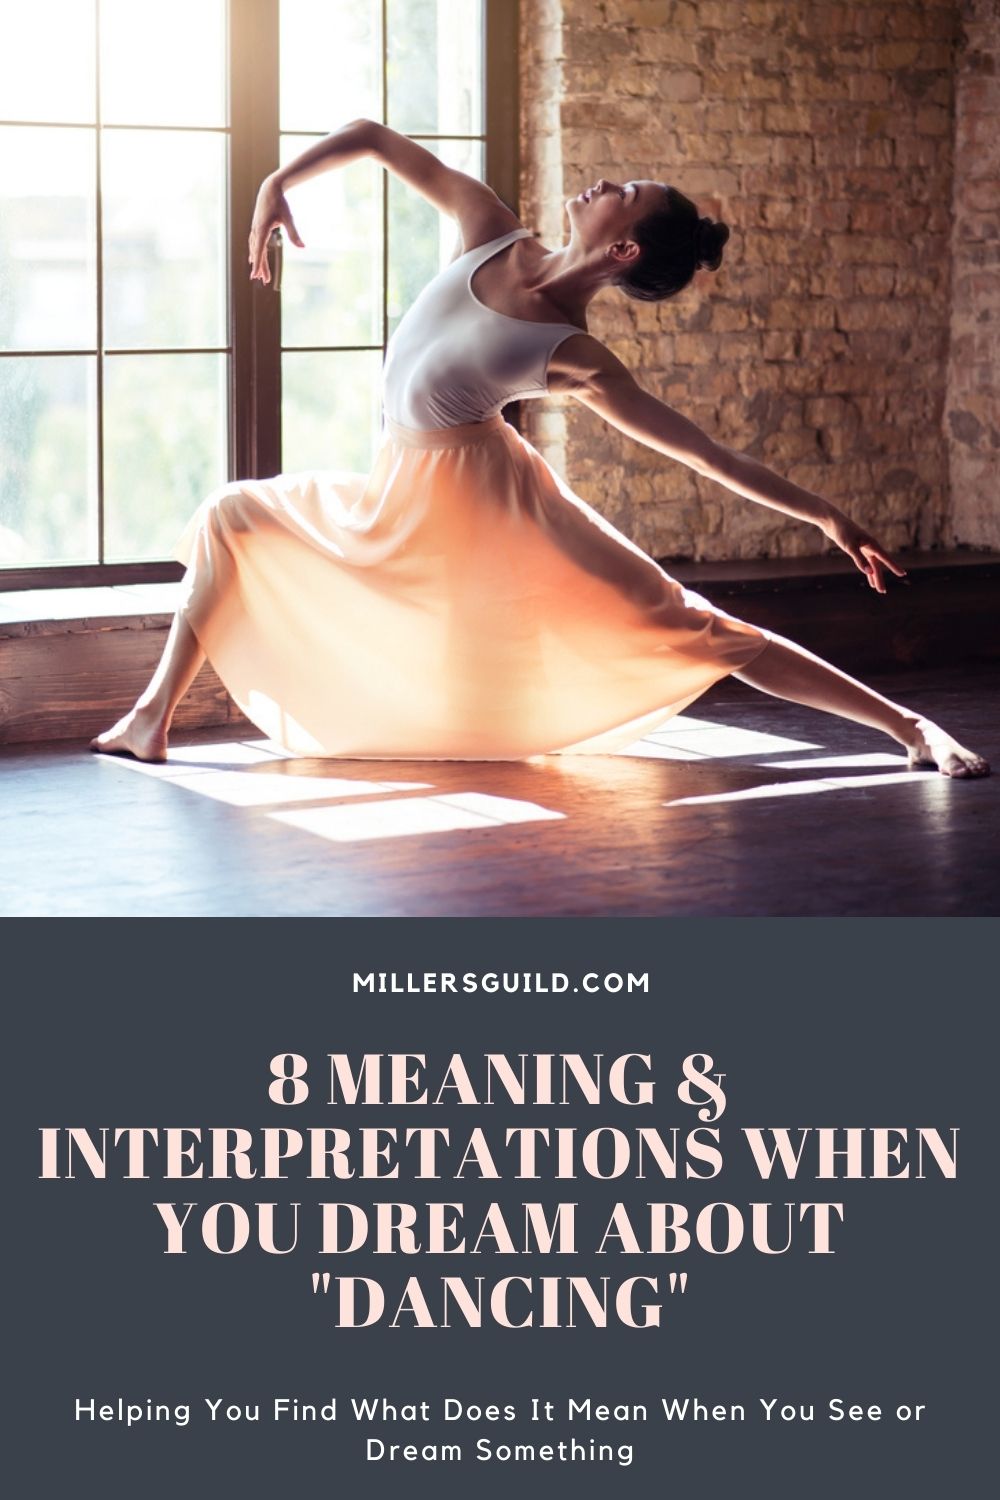 8 Meaning & Interpretations When You Dream About Dancing 2